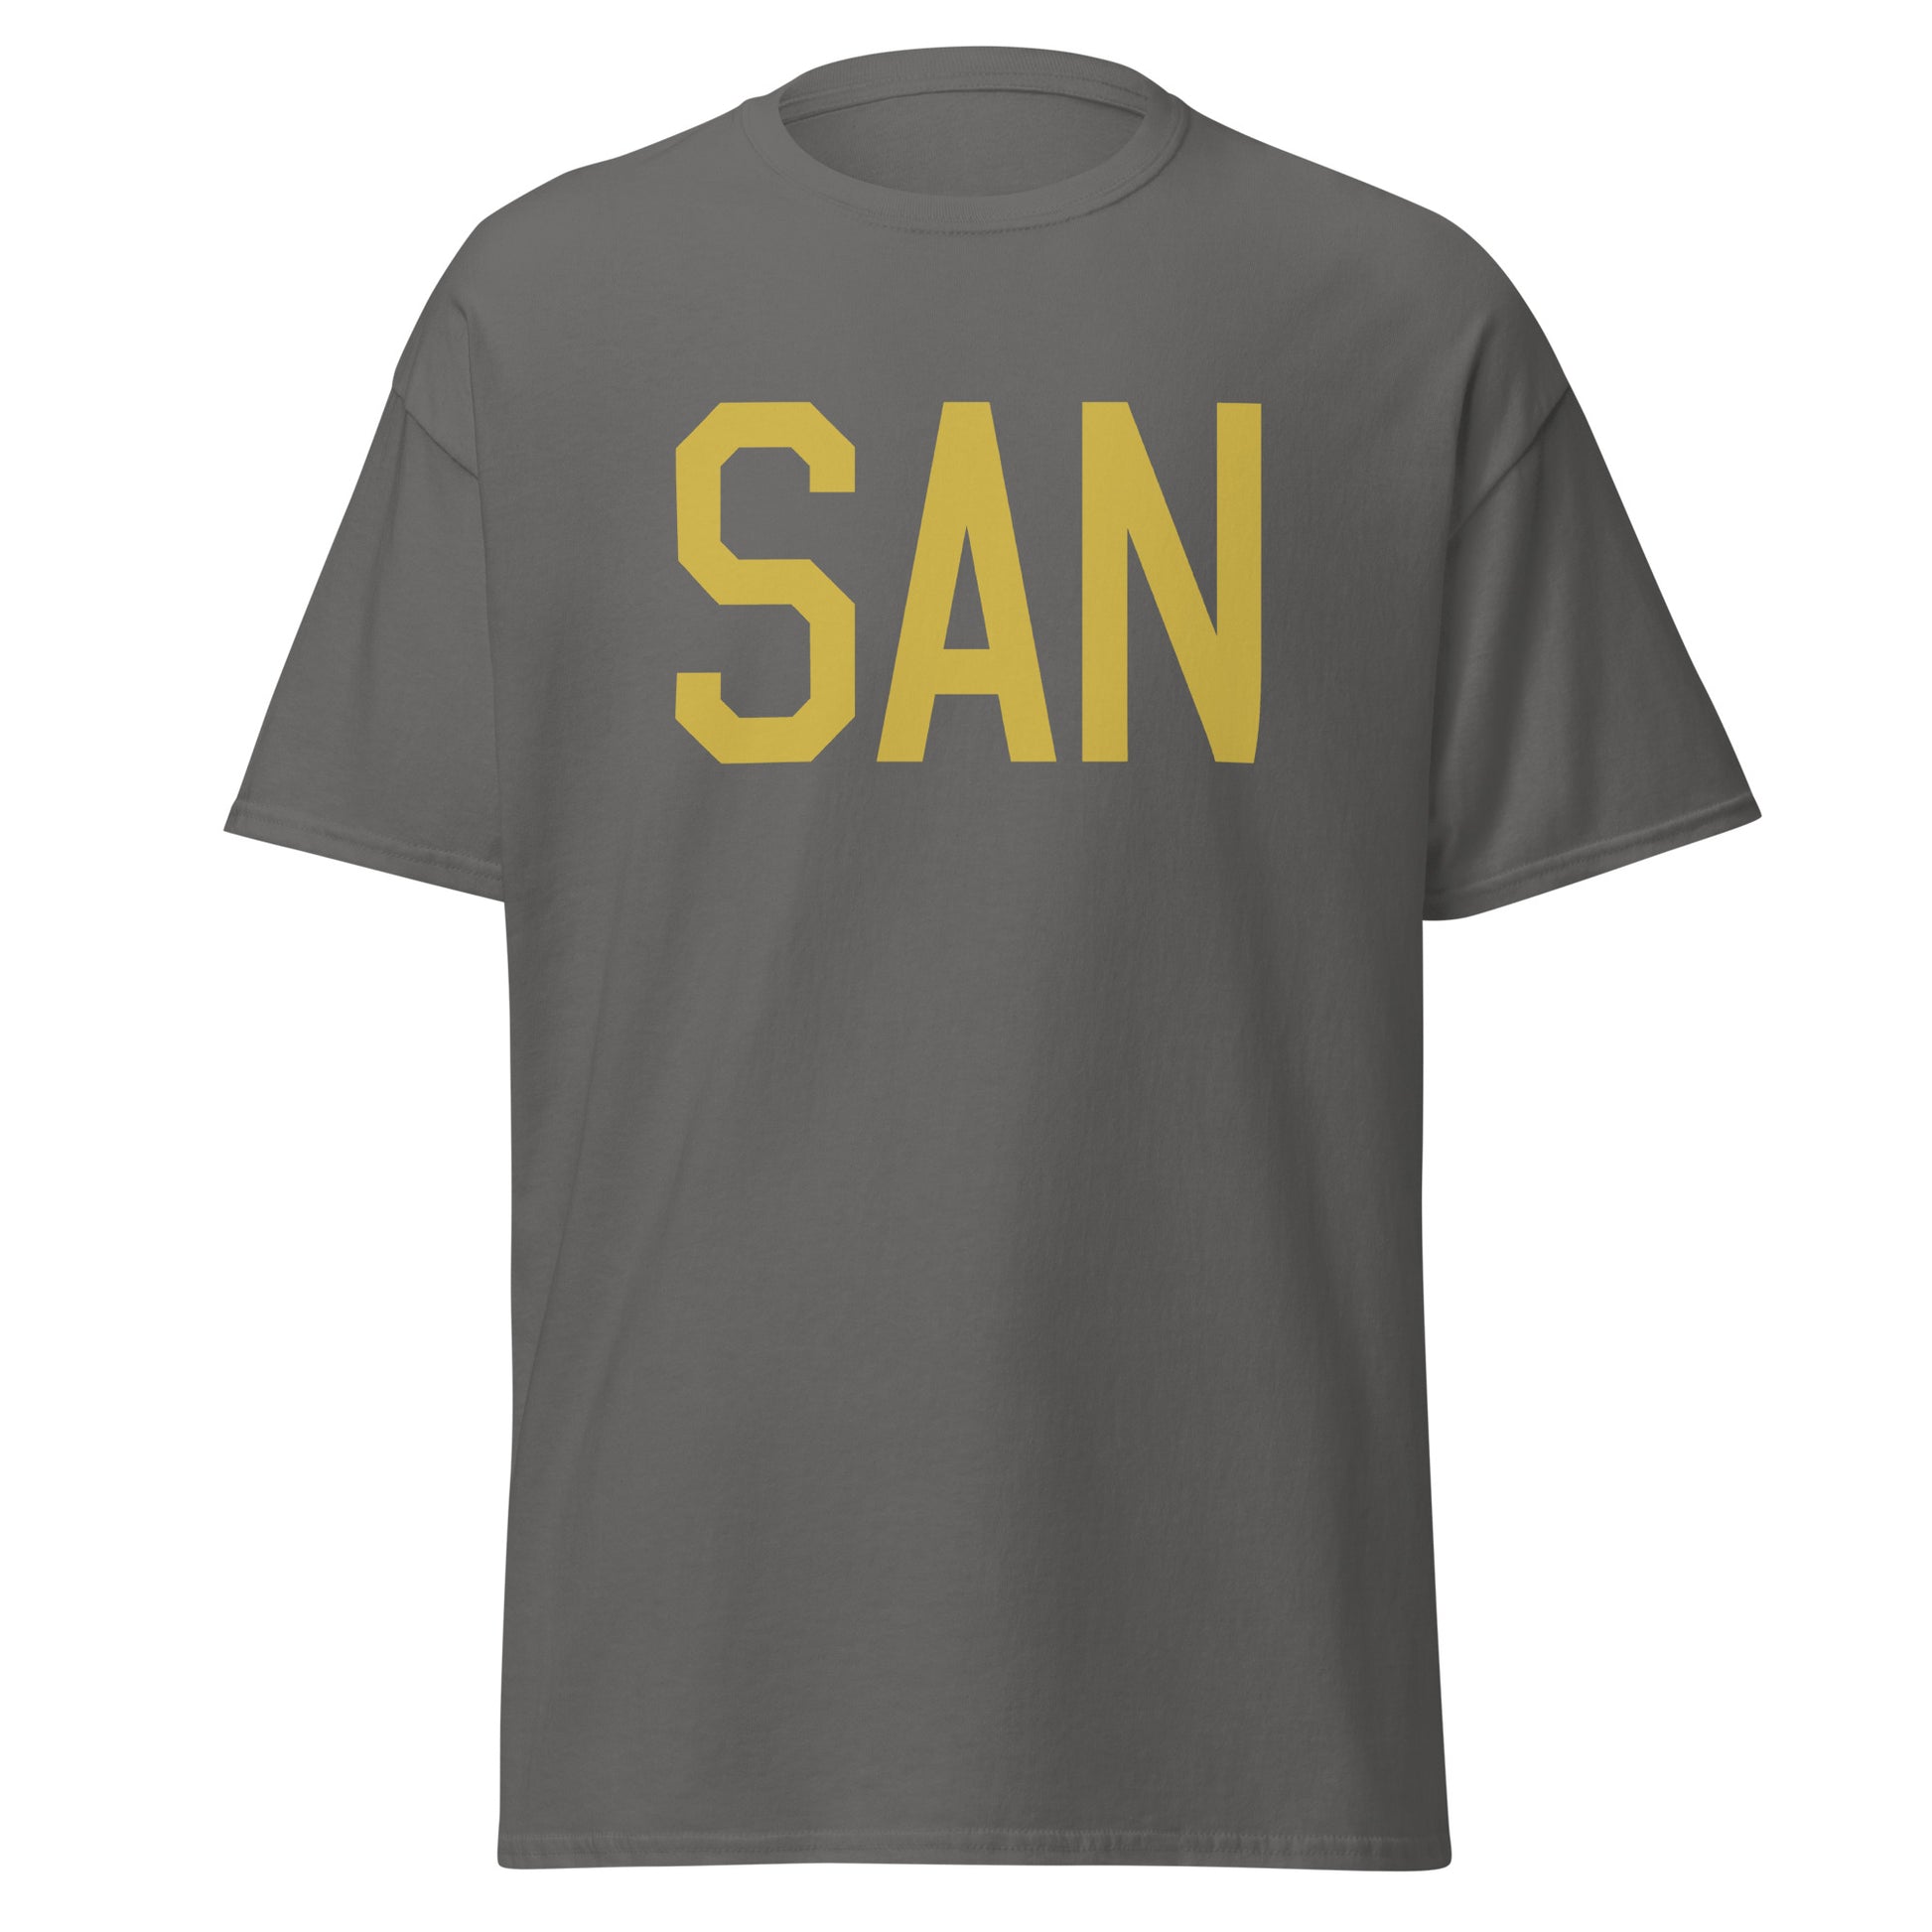 Aviation Enthusiast Men's Tee - Old Gold Graphic • SAN San Diego • YHM Designs - Image 05